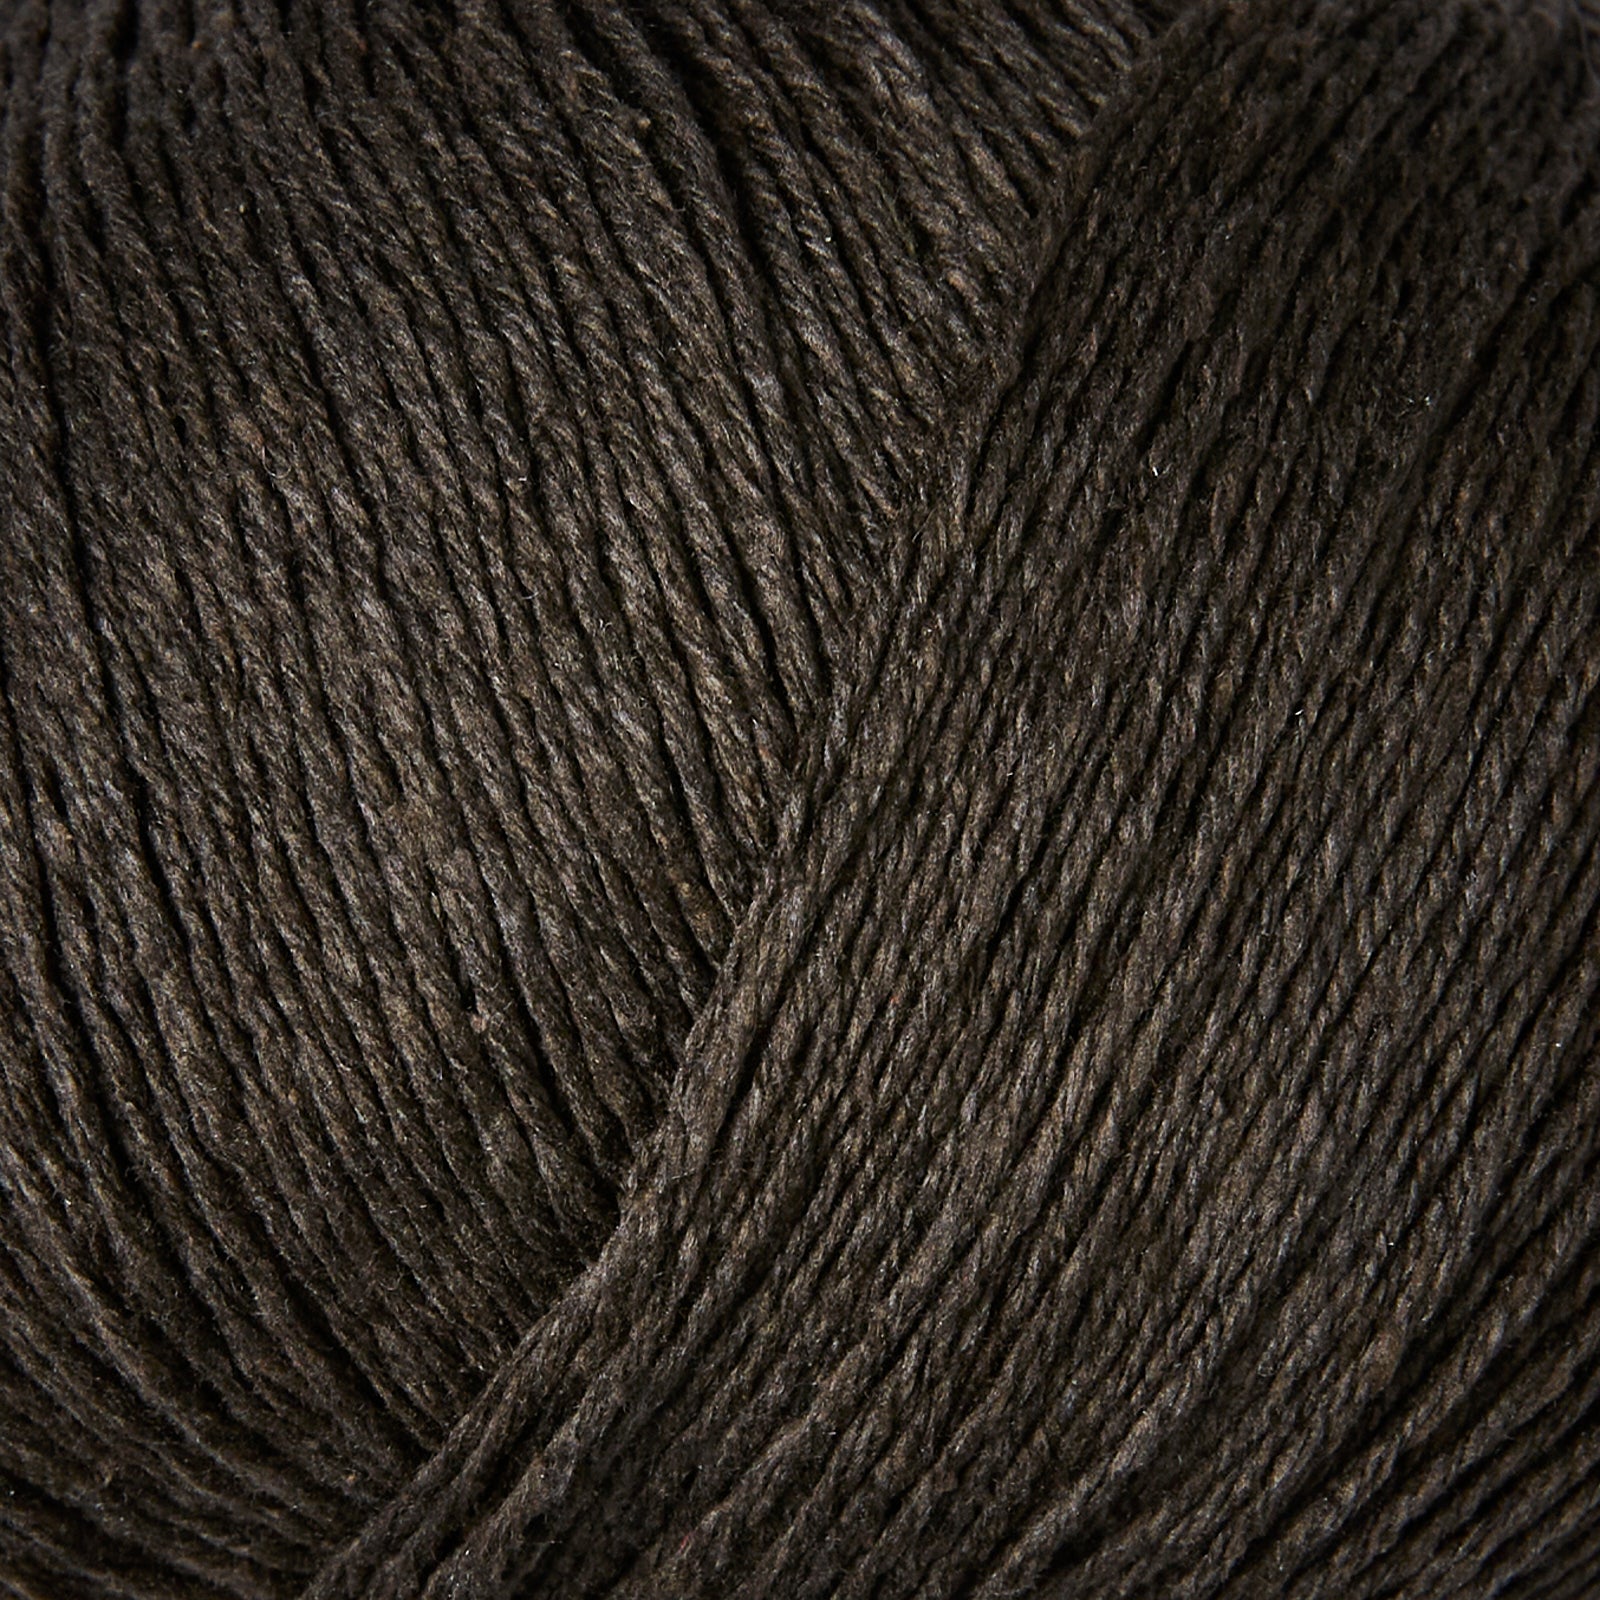 Knitting for Olive Pure Silk - Brown bear